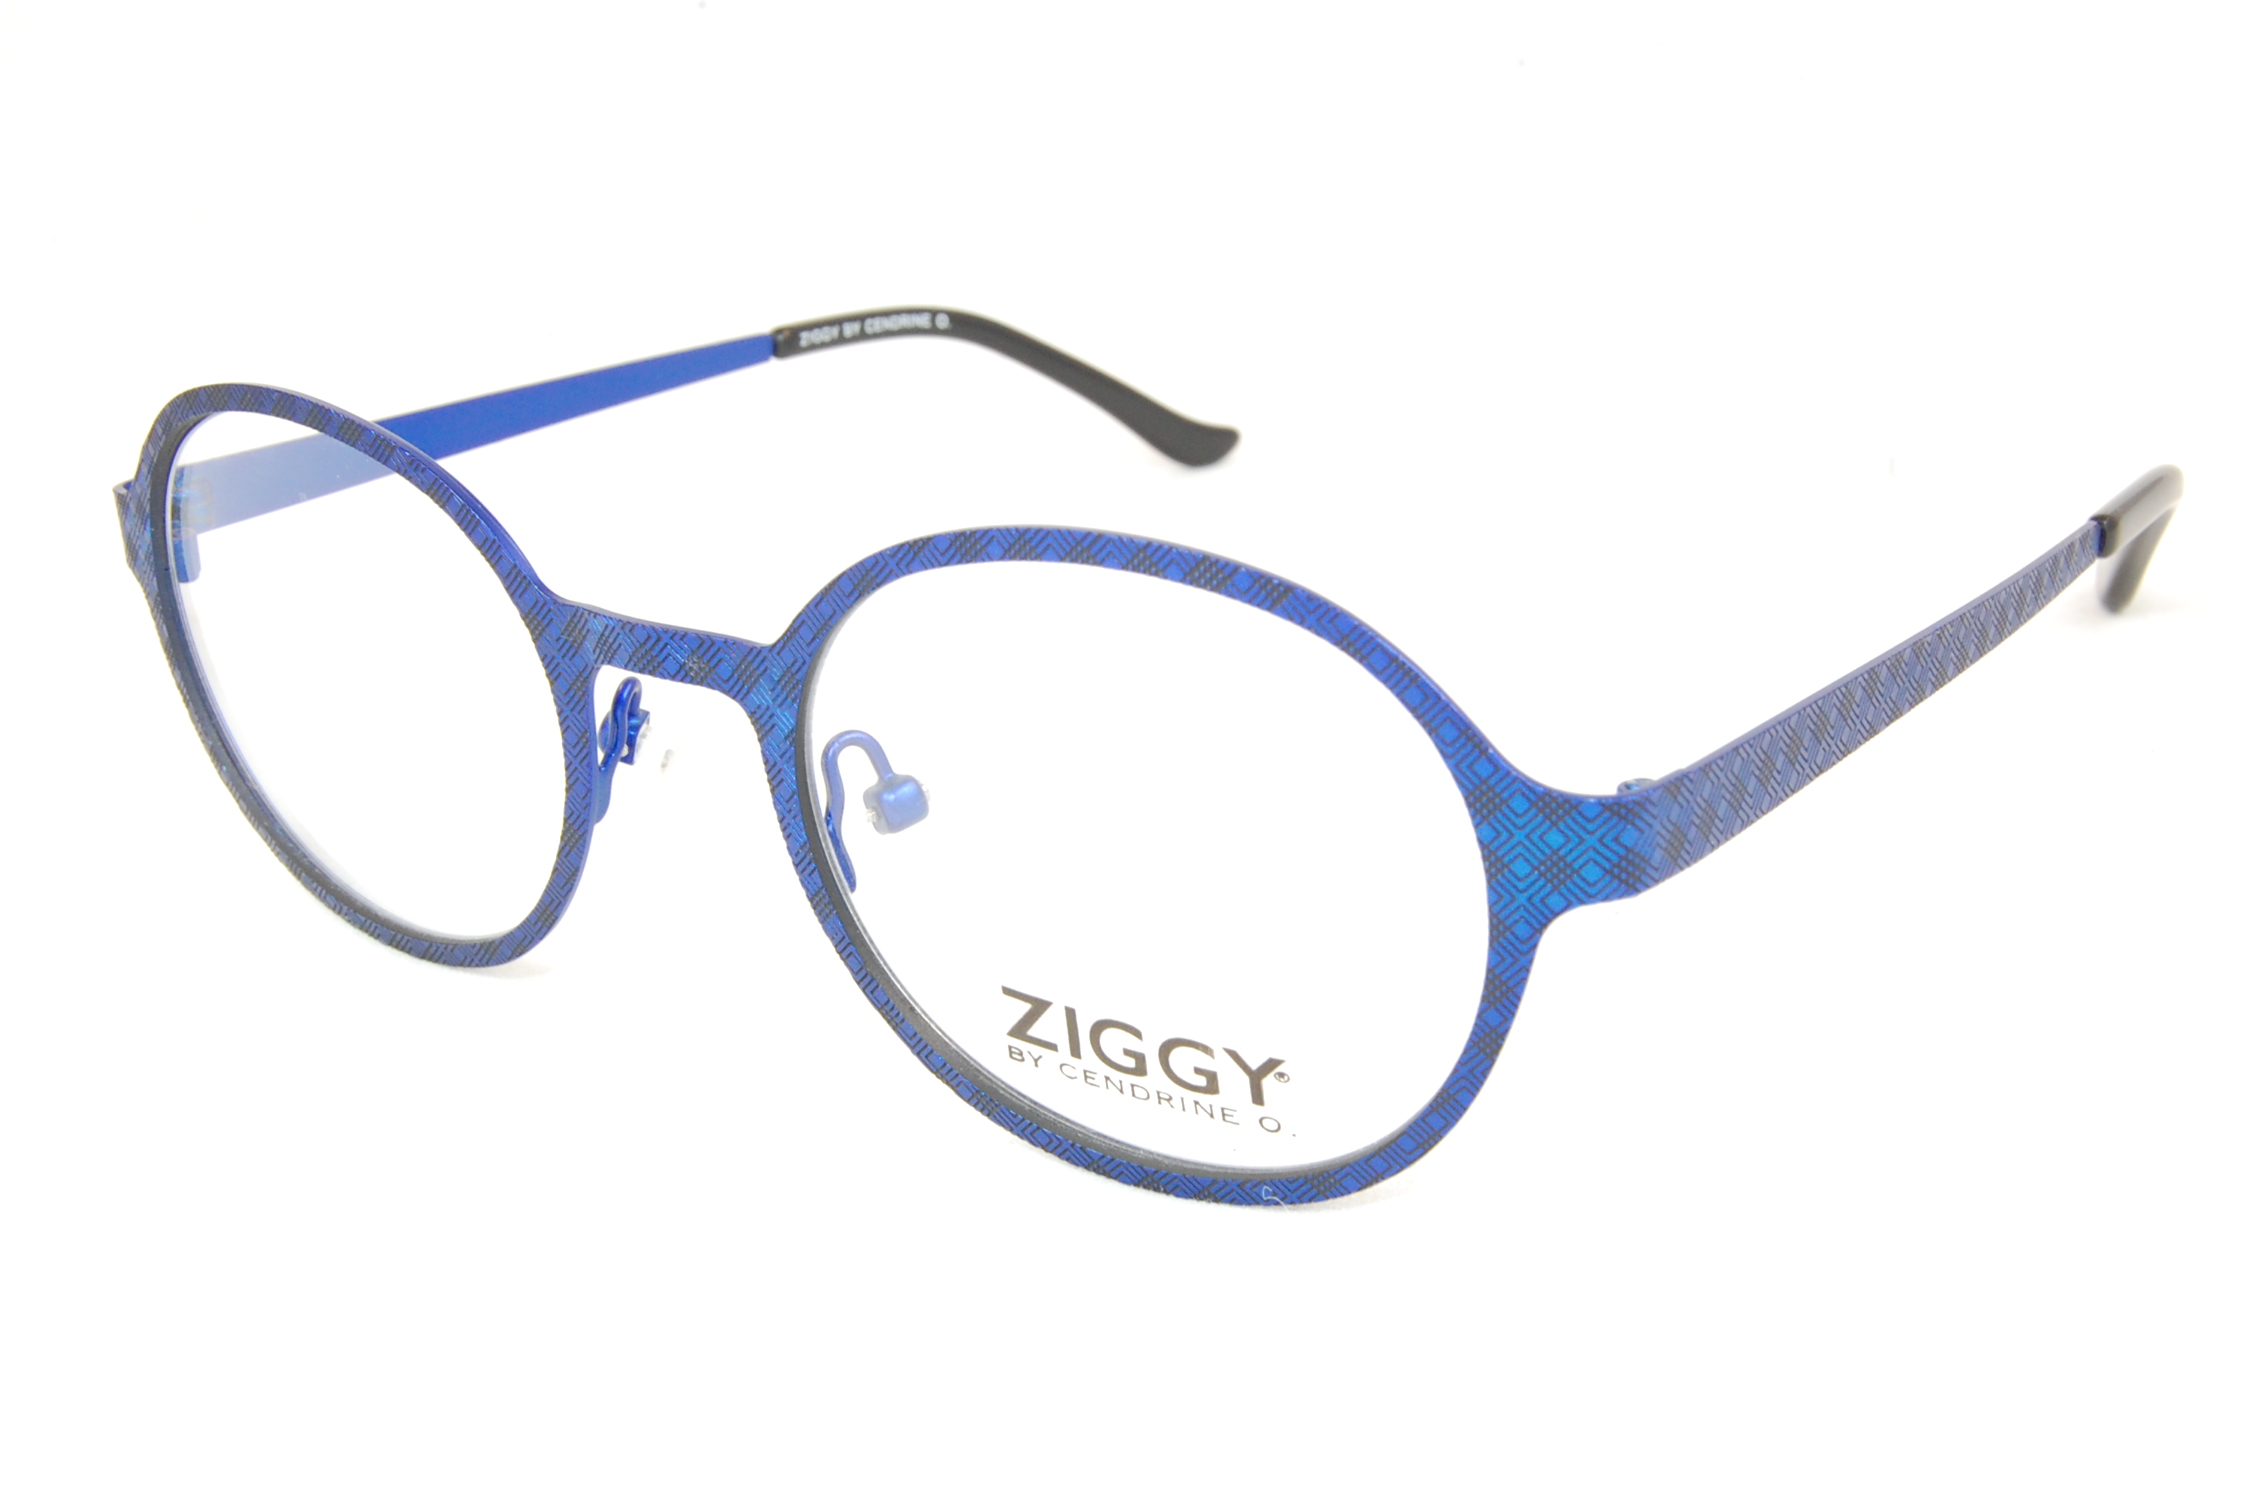 ZIGGY OPTIQUE 10/10 FACHES THUMESNIL